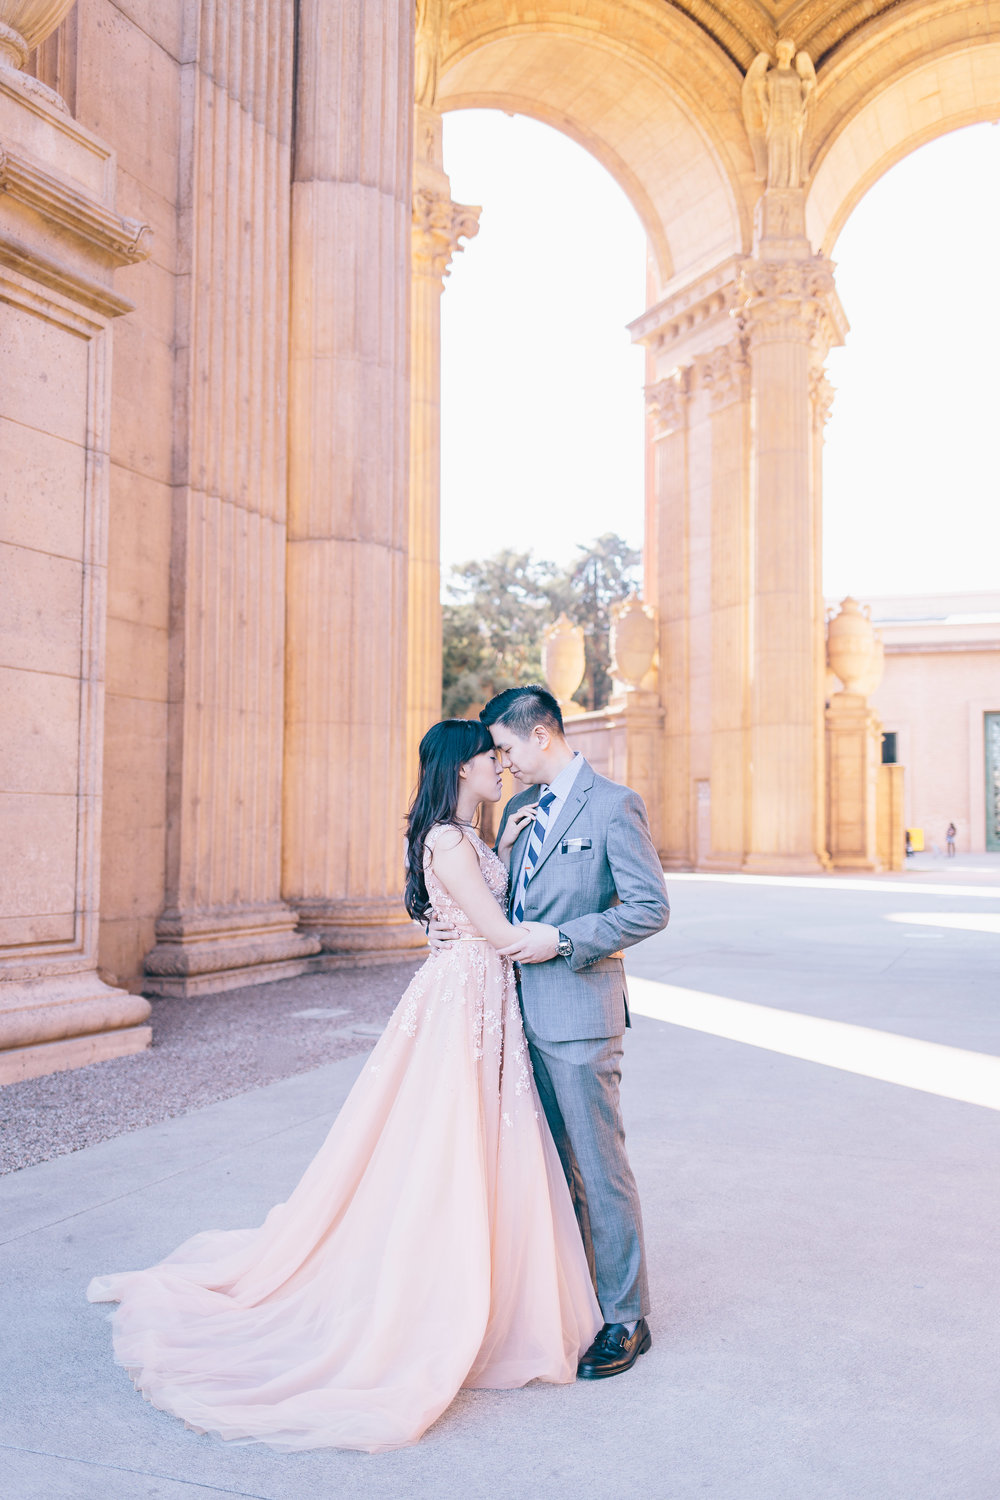 Best Engagement Photo Locations in San Francisco - Palace of Fine Arts Engagement Photos by JBJ Pictures (8).jpg